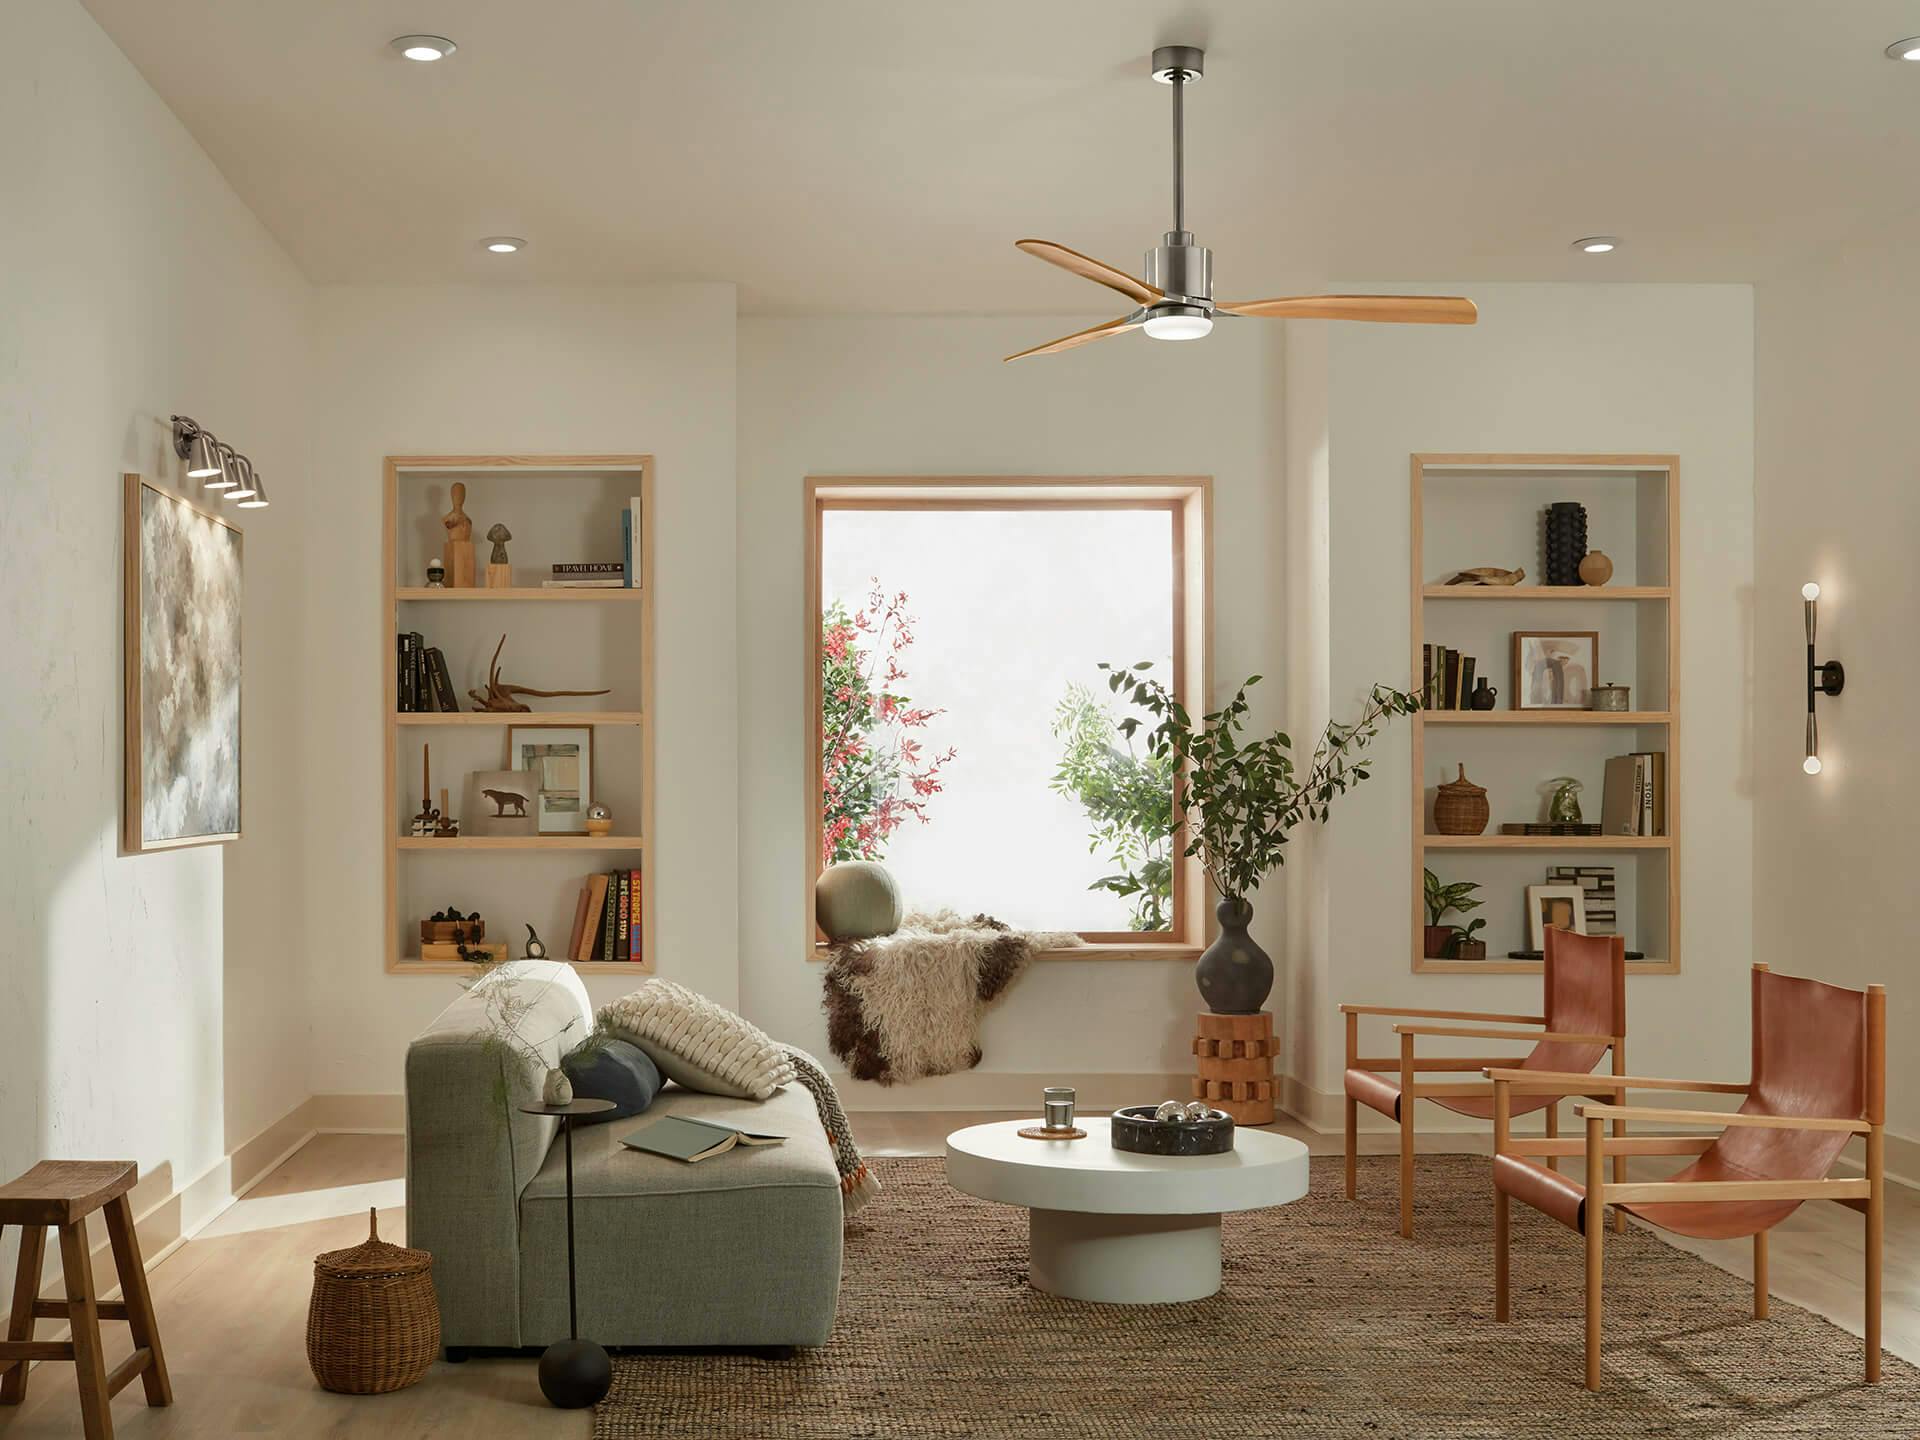 Living room during the day featuring a Ridley ceiling fan